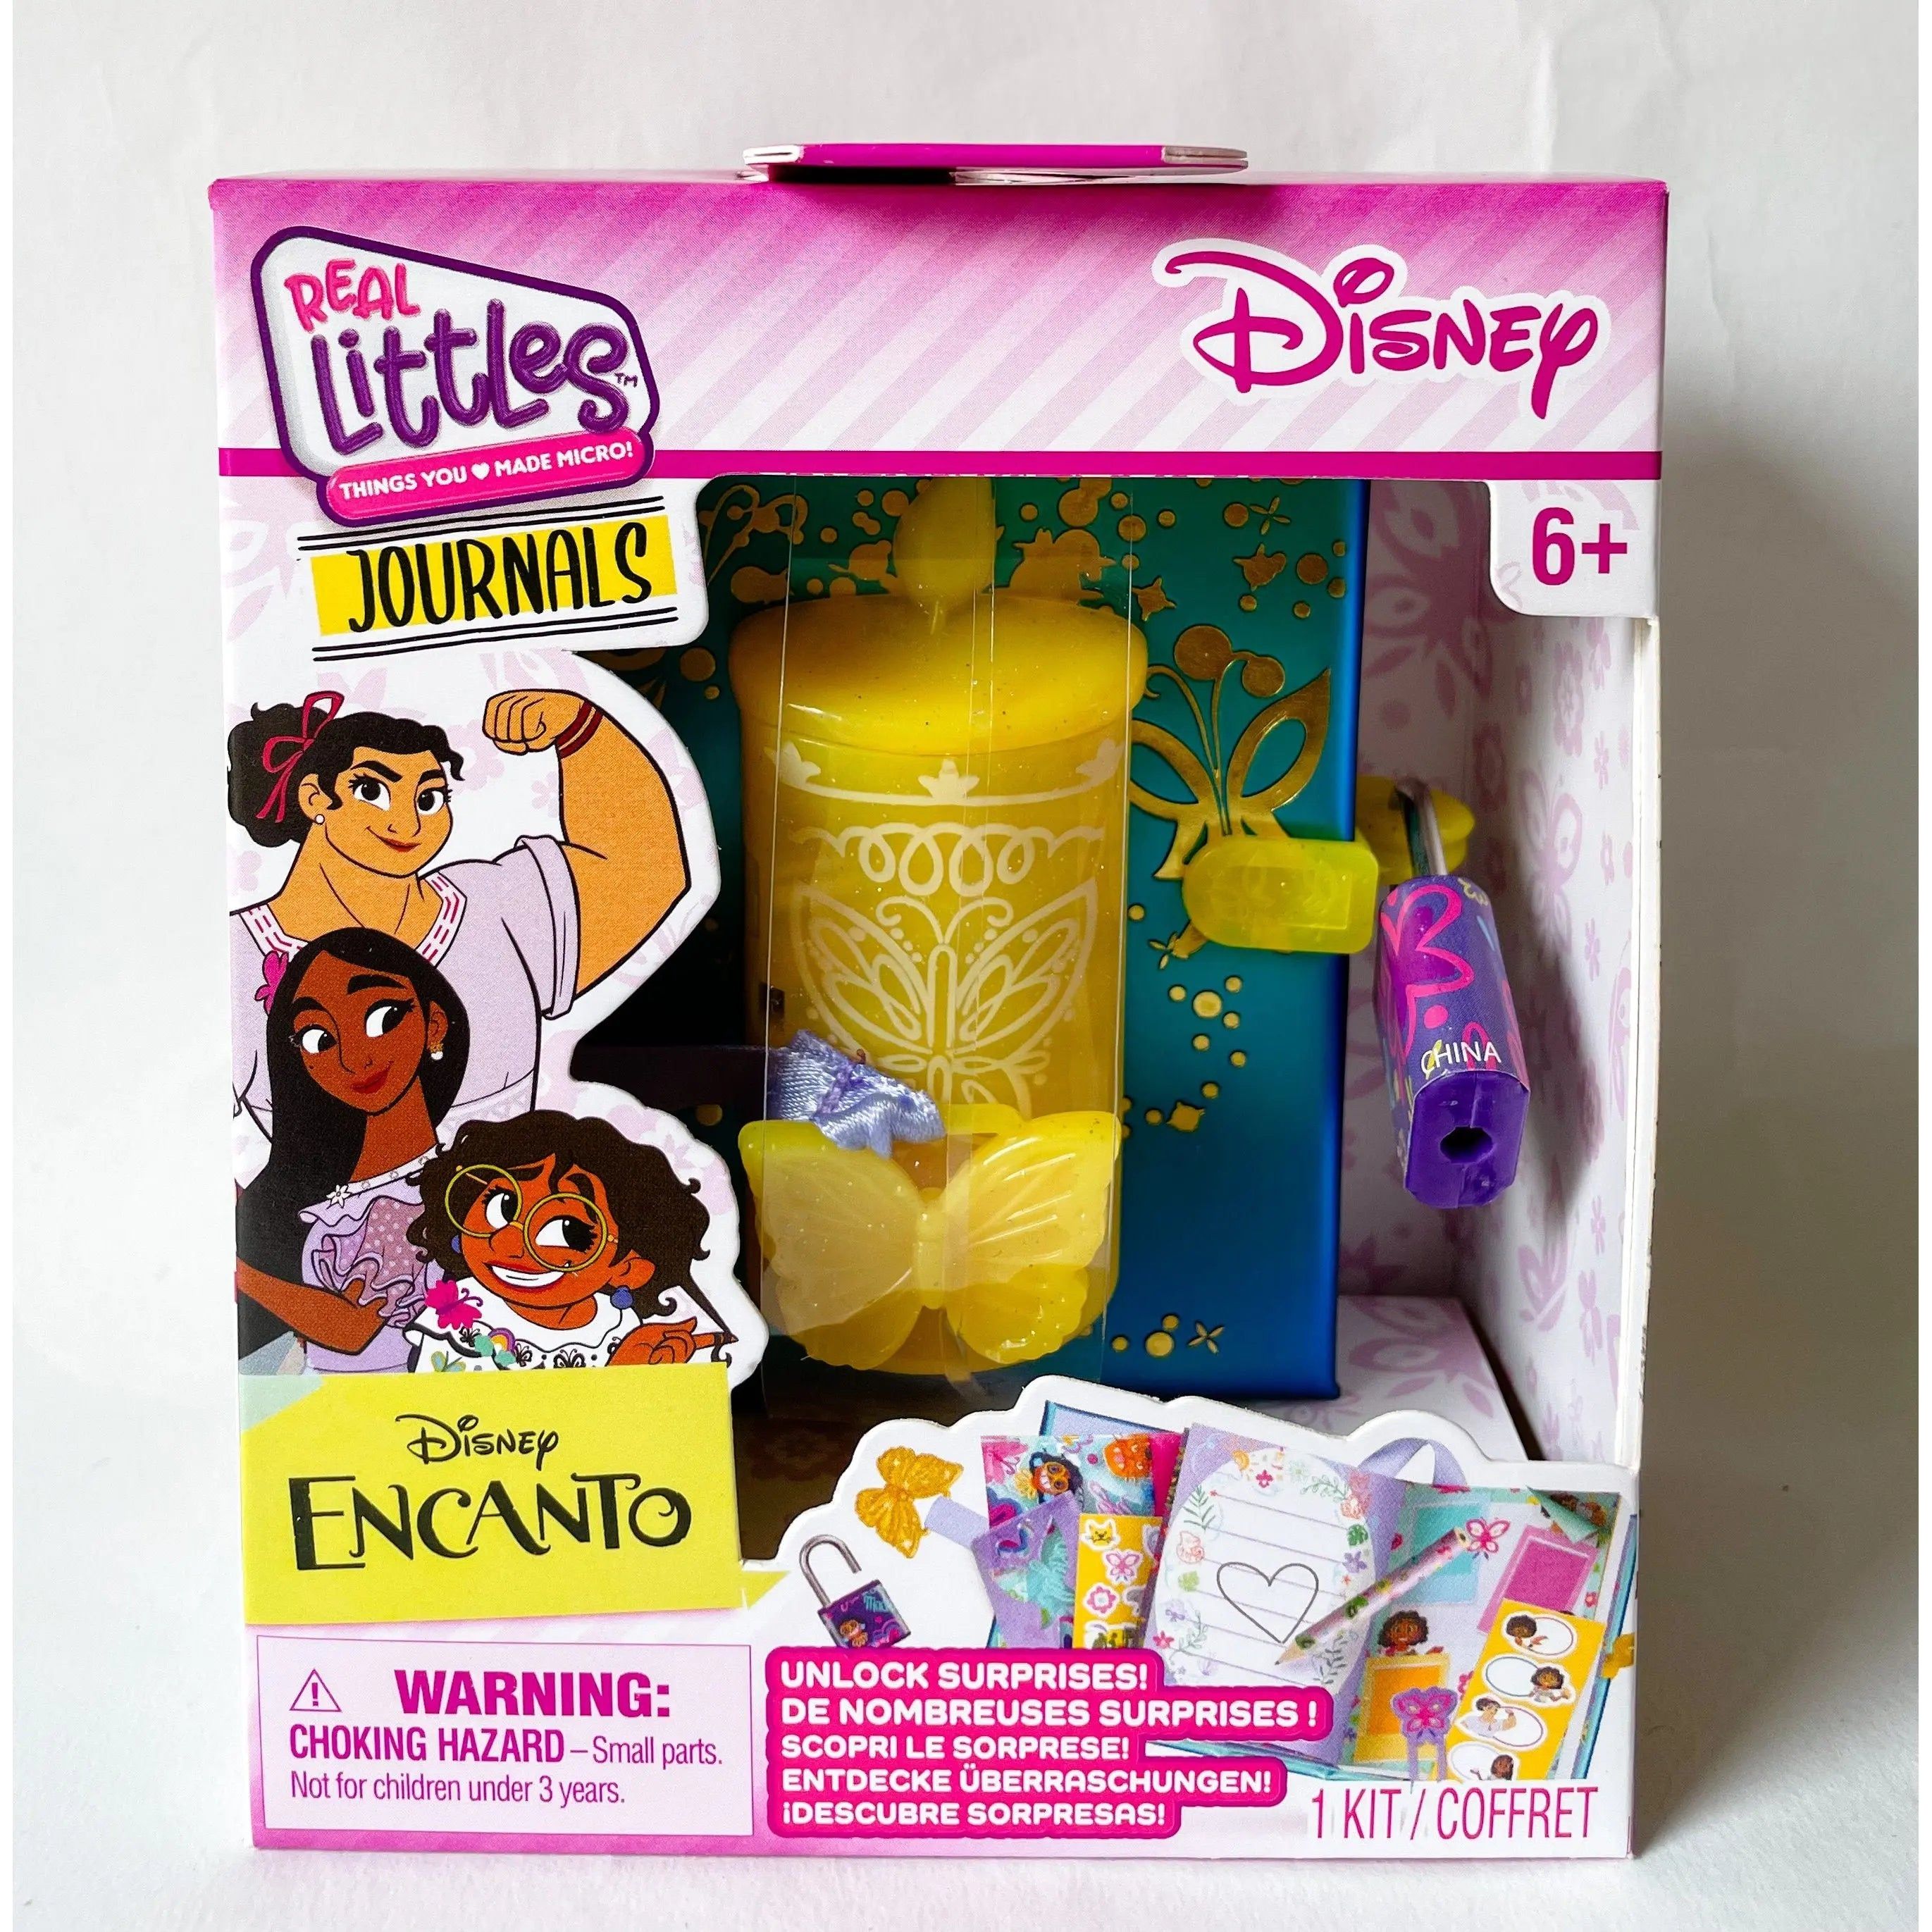 NEW Disney Real Littles Journals Unboxing & Review! 